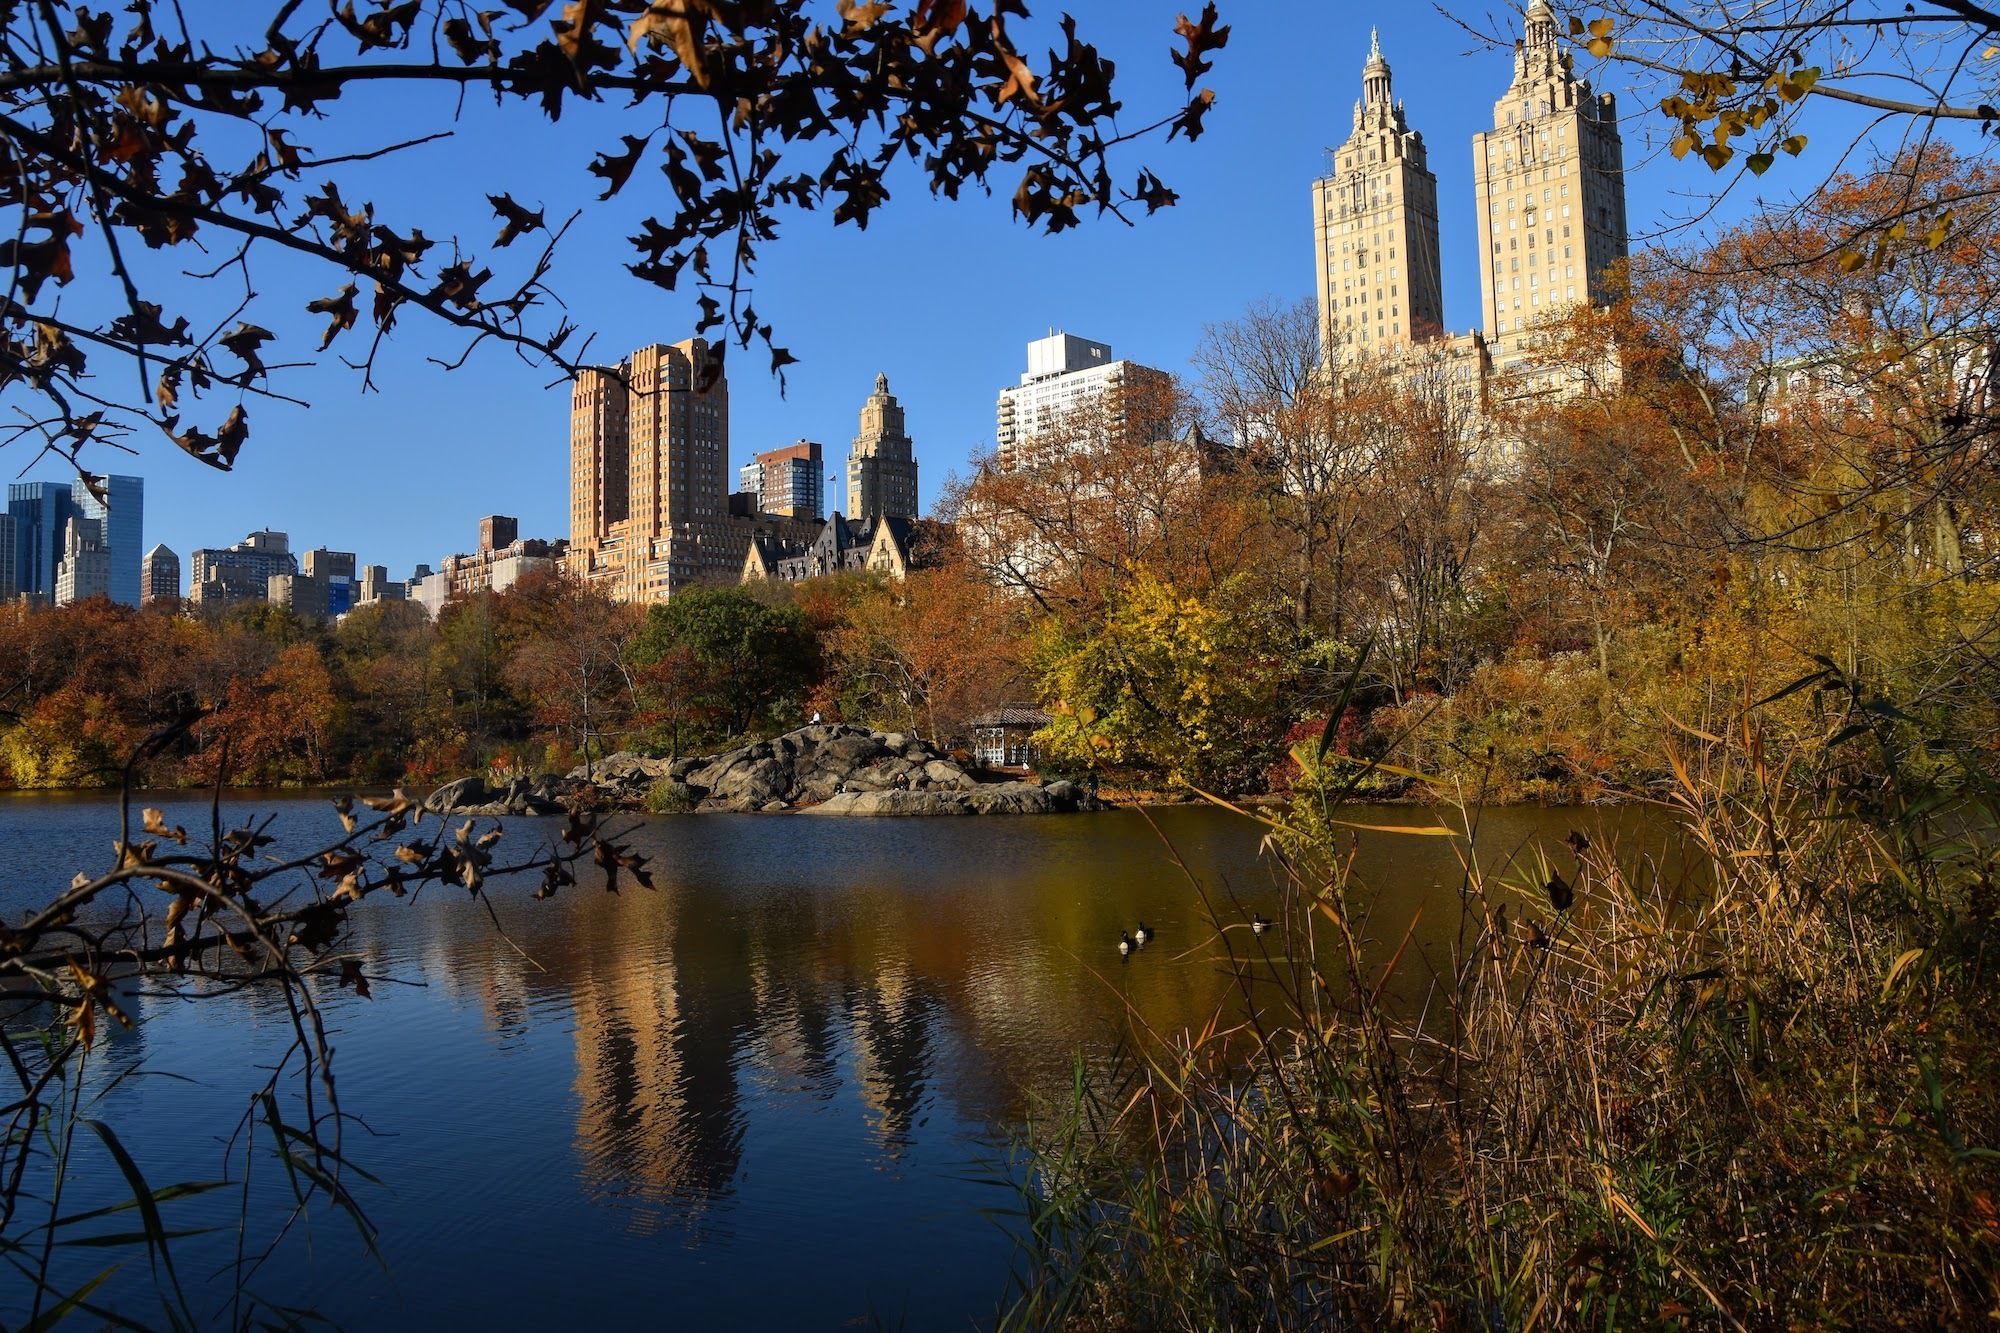 A view of the Central Park Lake from the Ramble shoreline. Photo: <a href="https://www.flickr.com/photos/larrycloss/" target="_blank">Larry Closs</a>